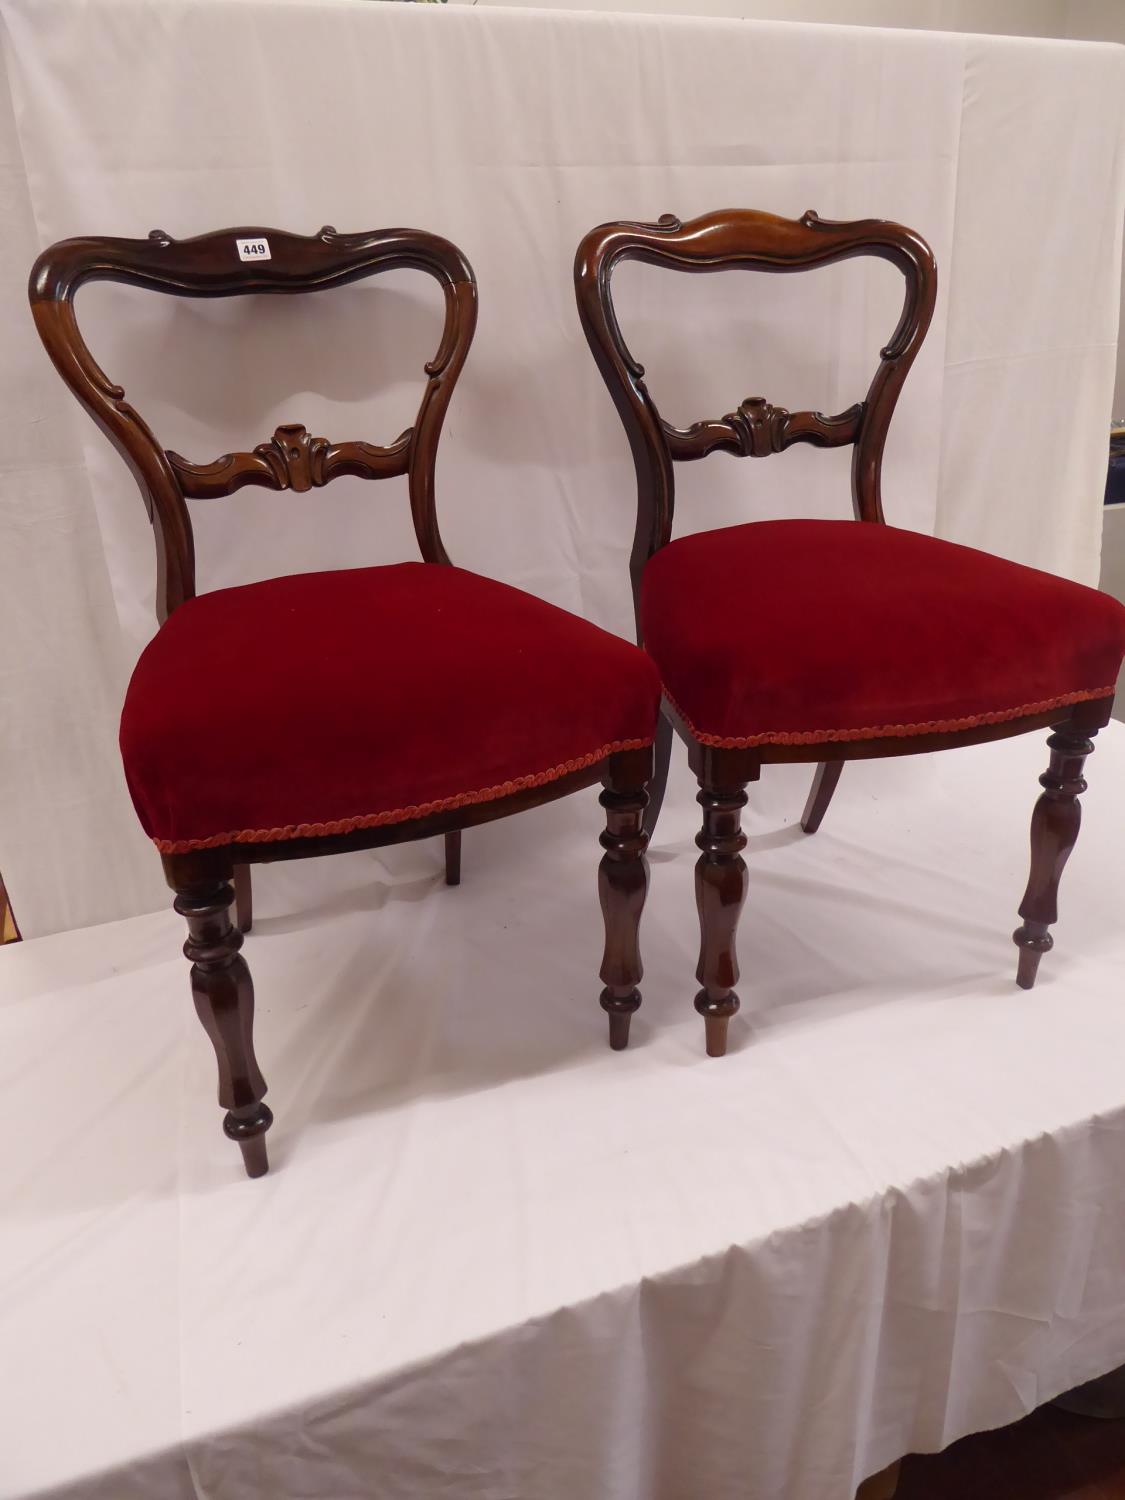 Pair victorian rosewood side chairs - Image 4 of 4